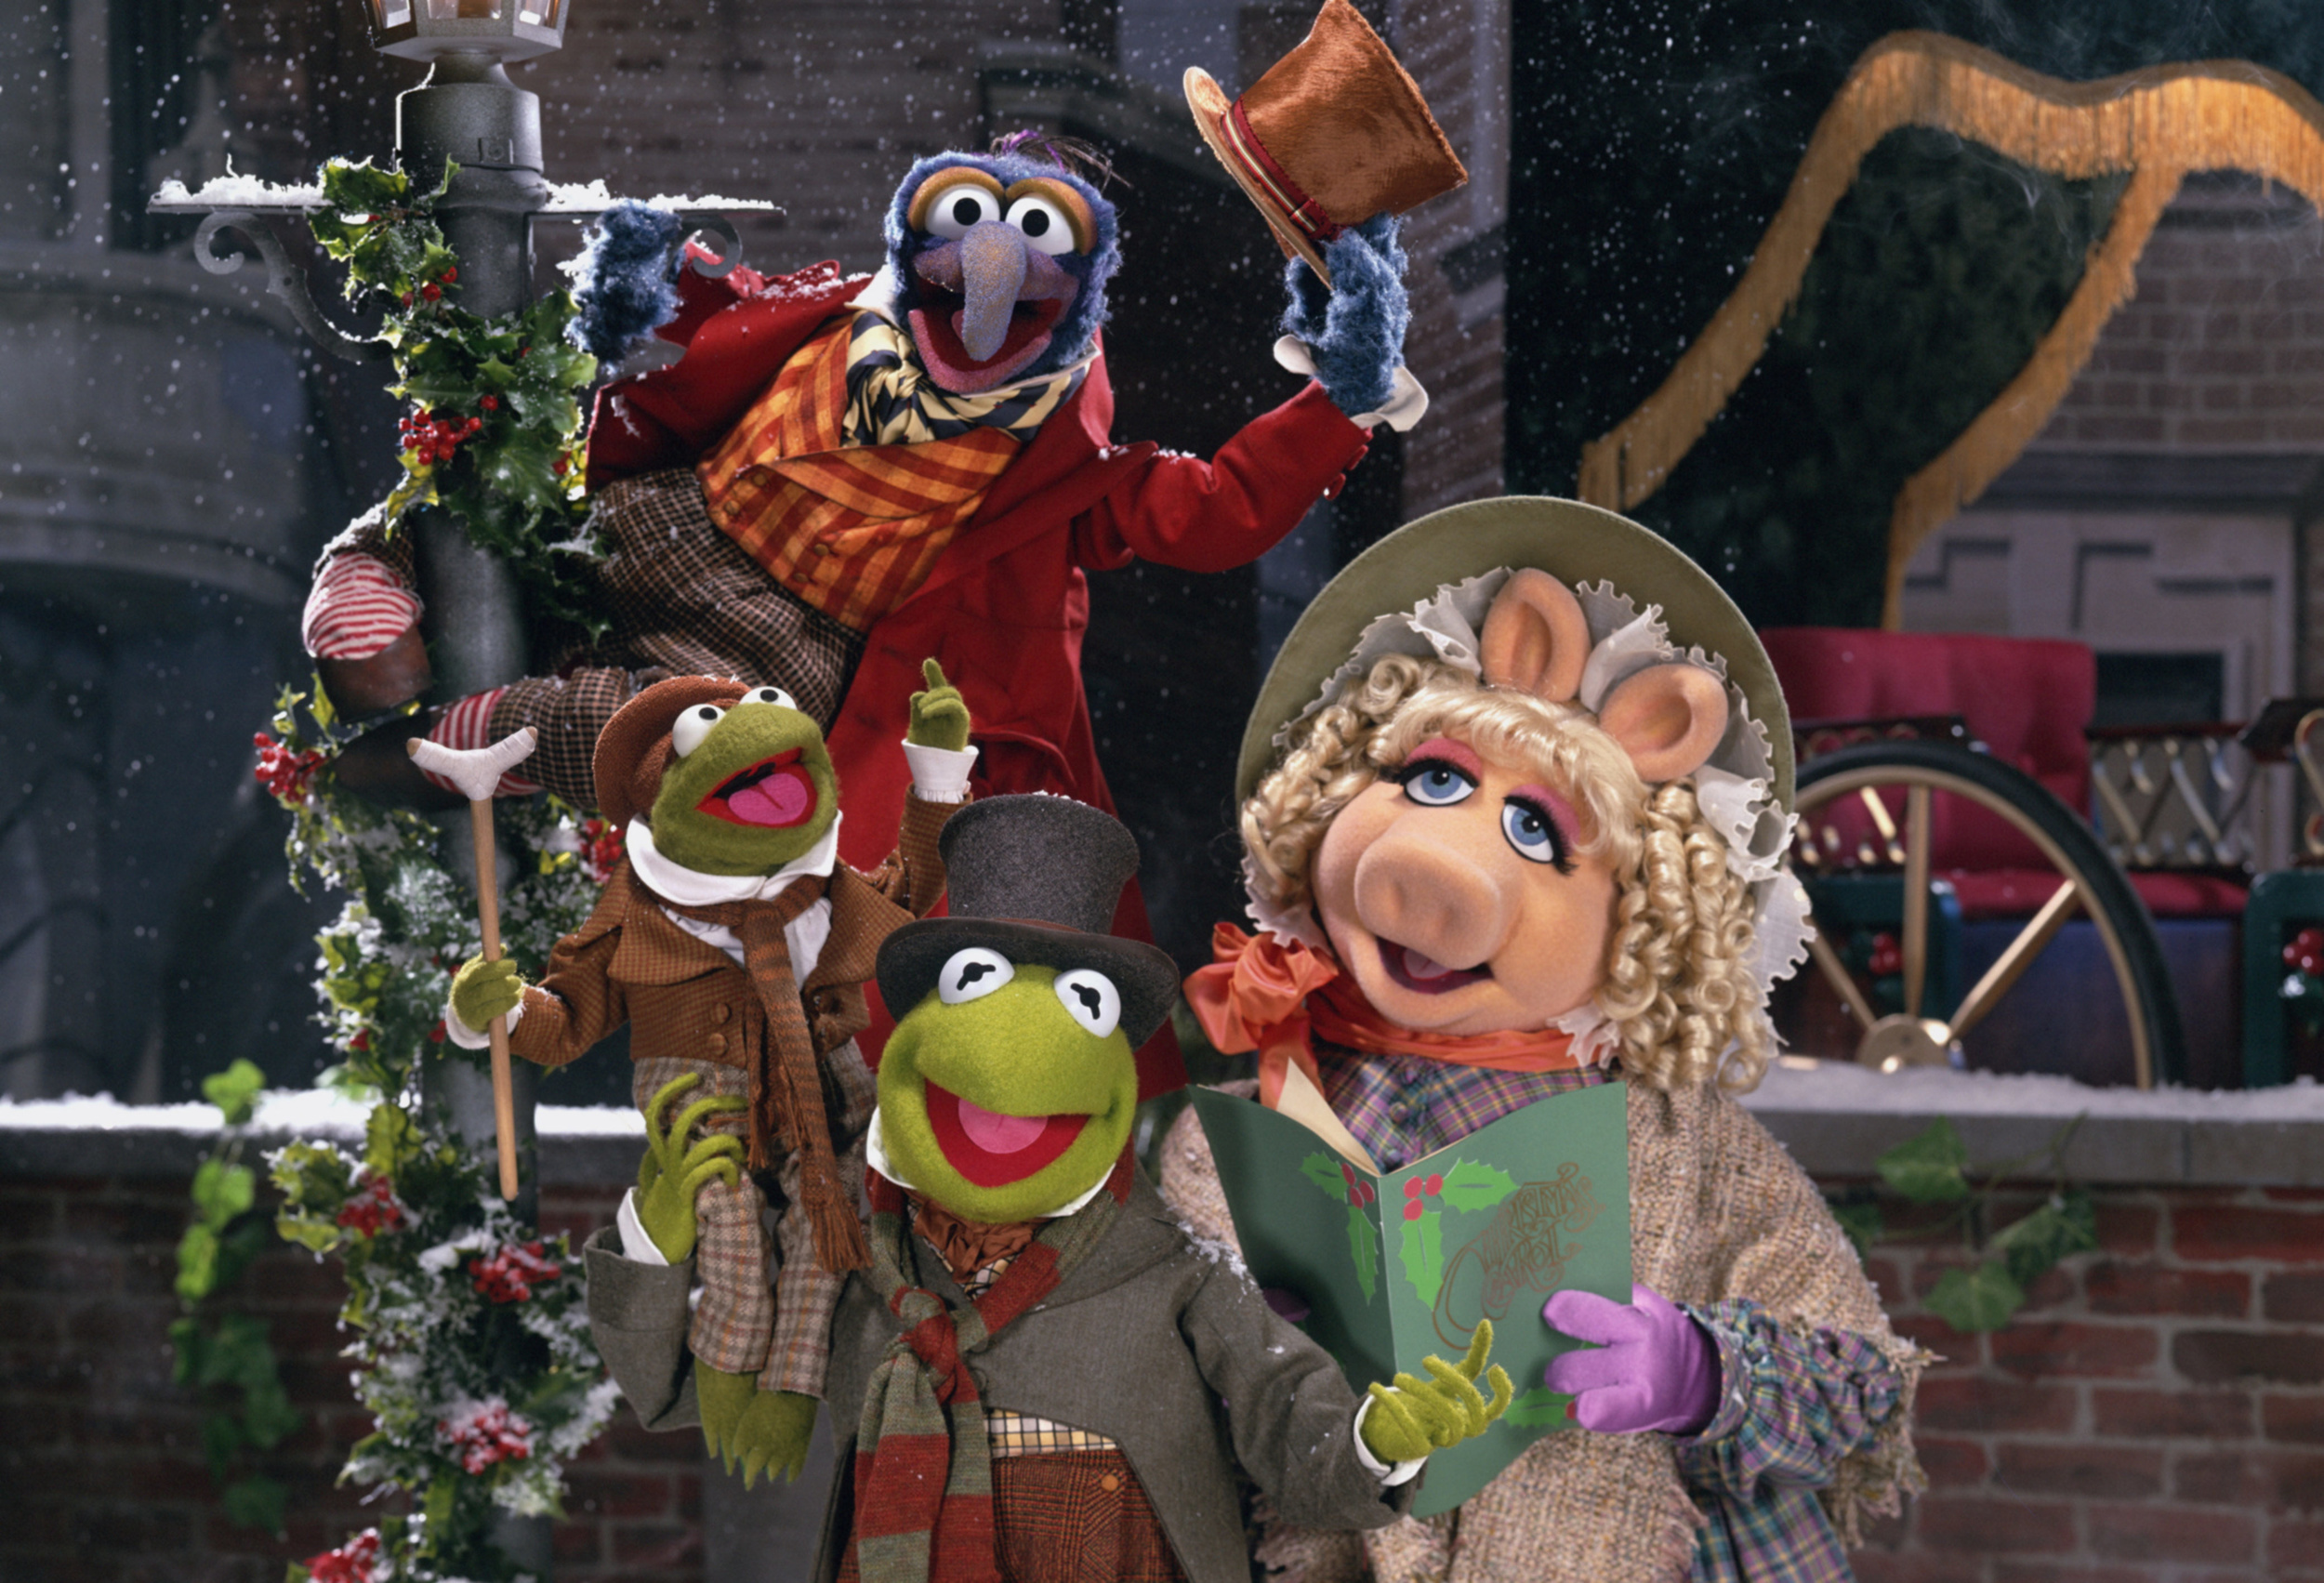 <p>We had to include a version of <em>Christmas Carol</em>. What version to choose, though? Decisions, decisions. Of all the adaptations of Dickens’ story, our favorite is the Muppets. Is it the most “London” of the bunch? Perhaps not, but there’s plenty of London to it.</p><p>You may also like: <a href='https://www.yardbarker.com/entertainment/articles/the_18_most_controversial_songs_in_country_music_history/s1__37737034'>The 18 most controversial songs in country music history</a></p>